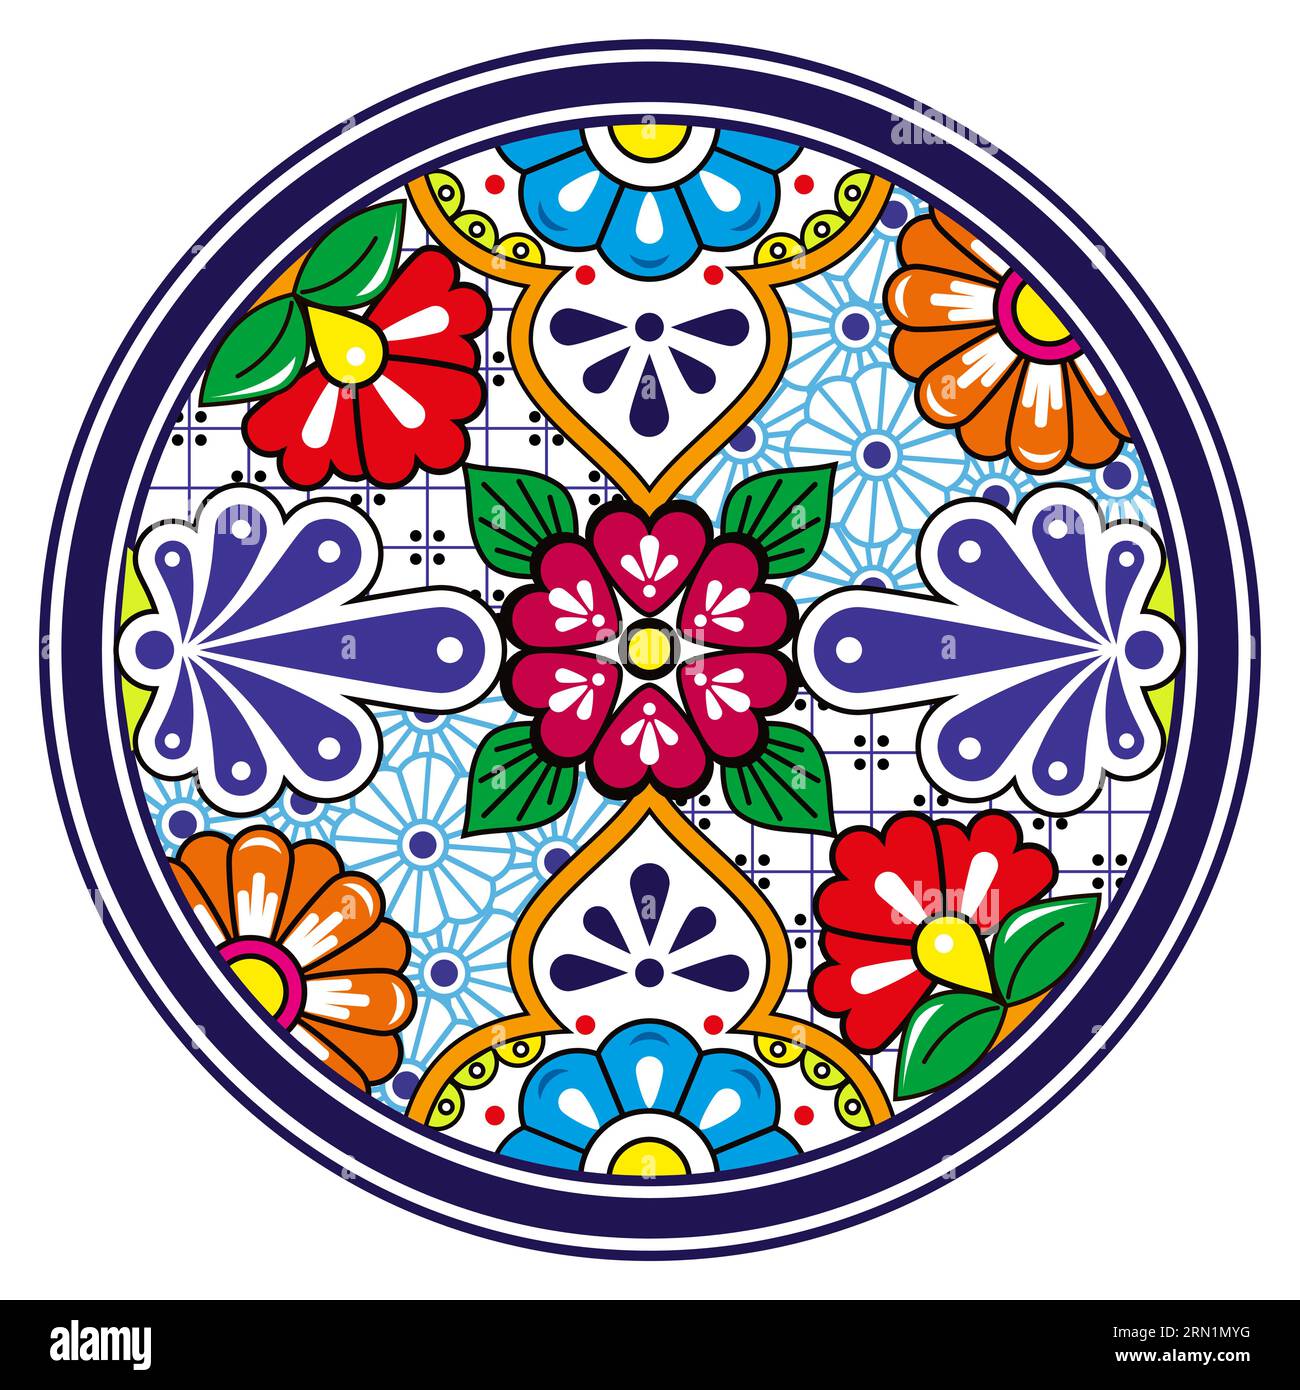 Mexican Talavera pottery or ceramics style vector plate design, round decorative background inspired by traditional designs from Mexico Stock Vector